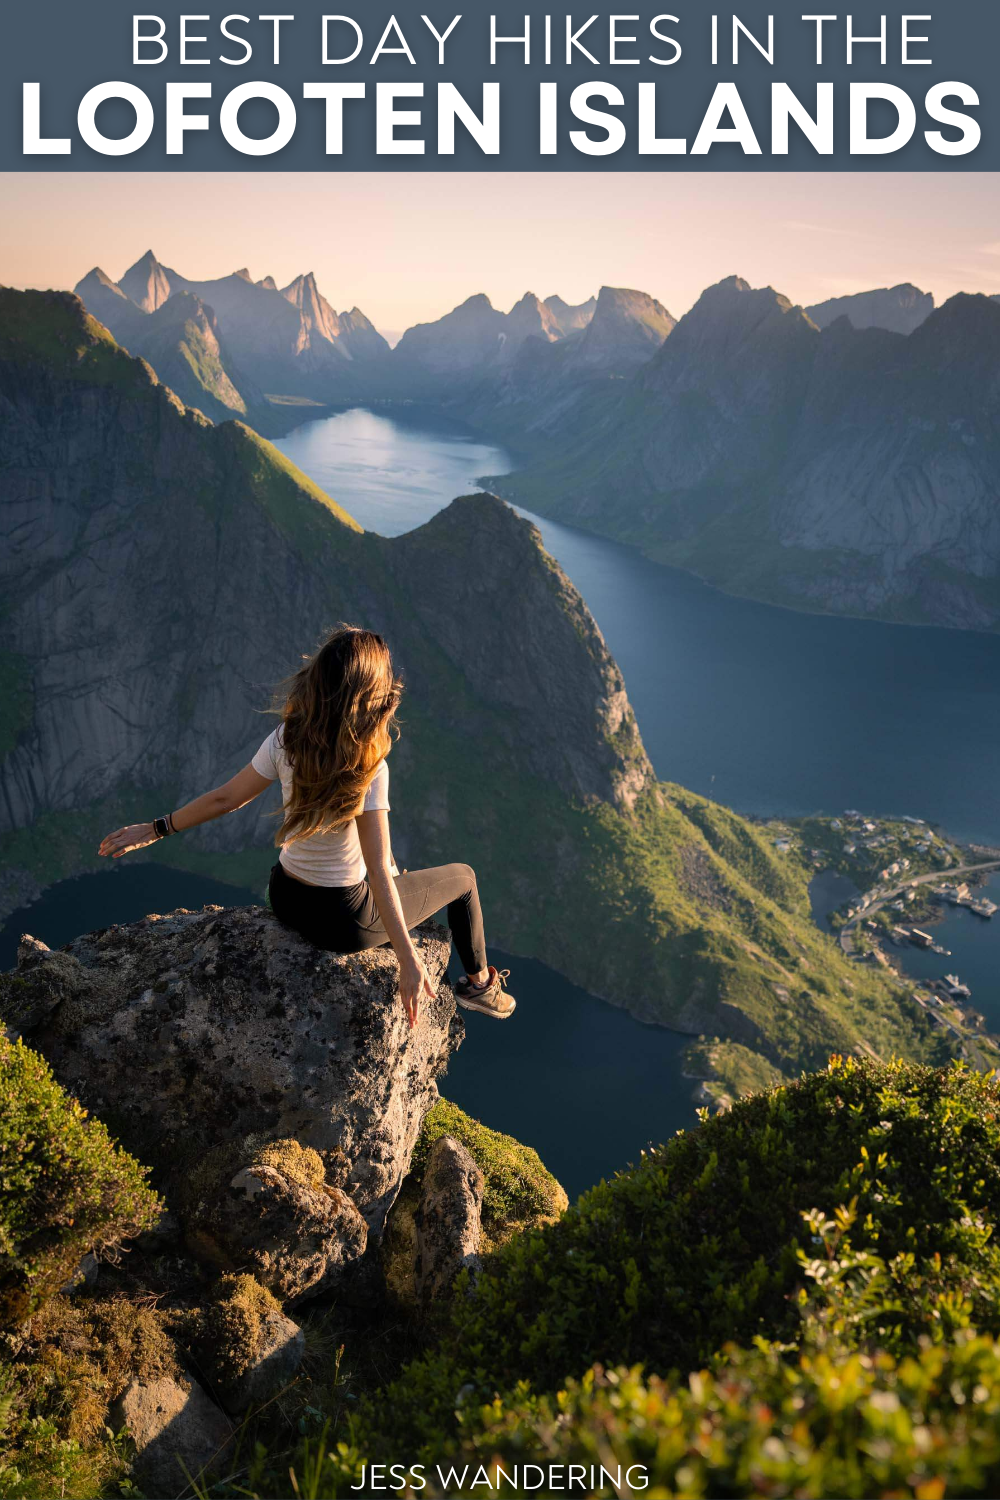 best day hikes in the lofoten islands with jess wandering overlooking the view at a lofoten hike in norway